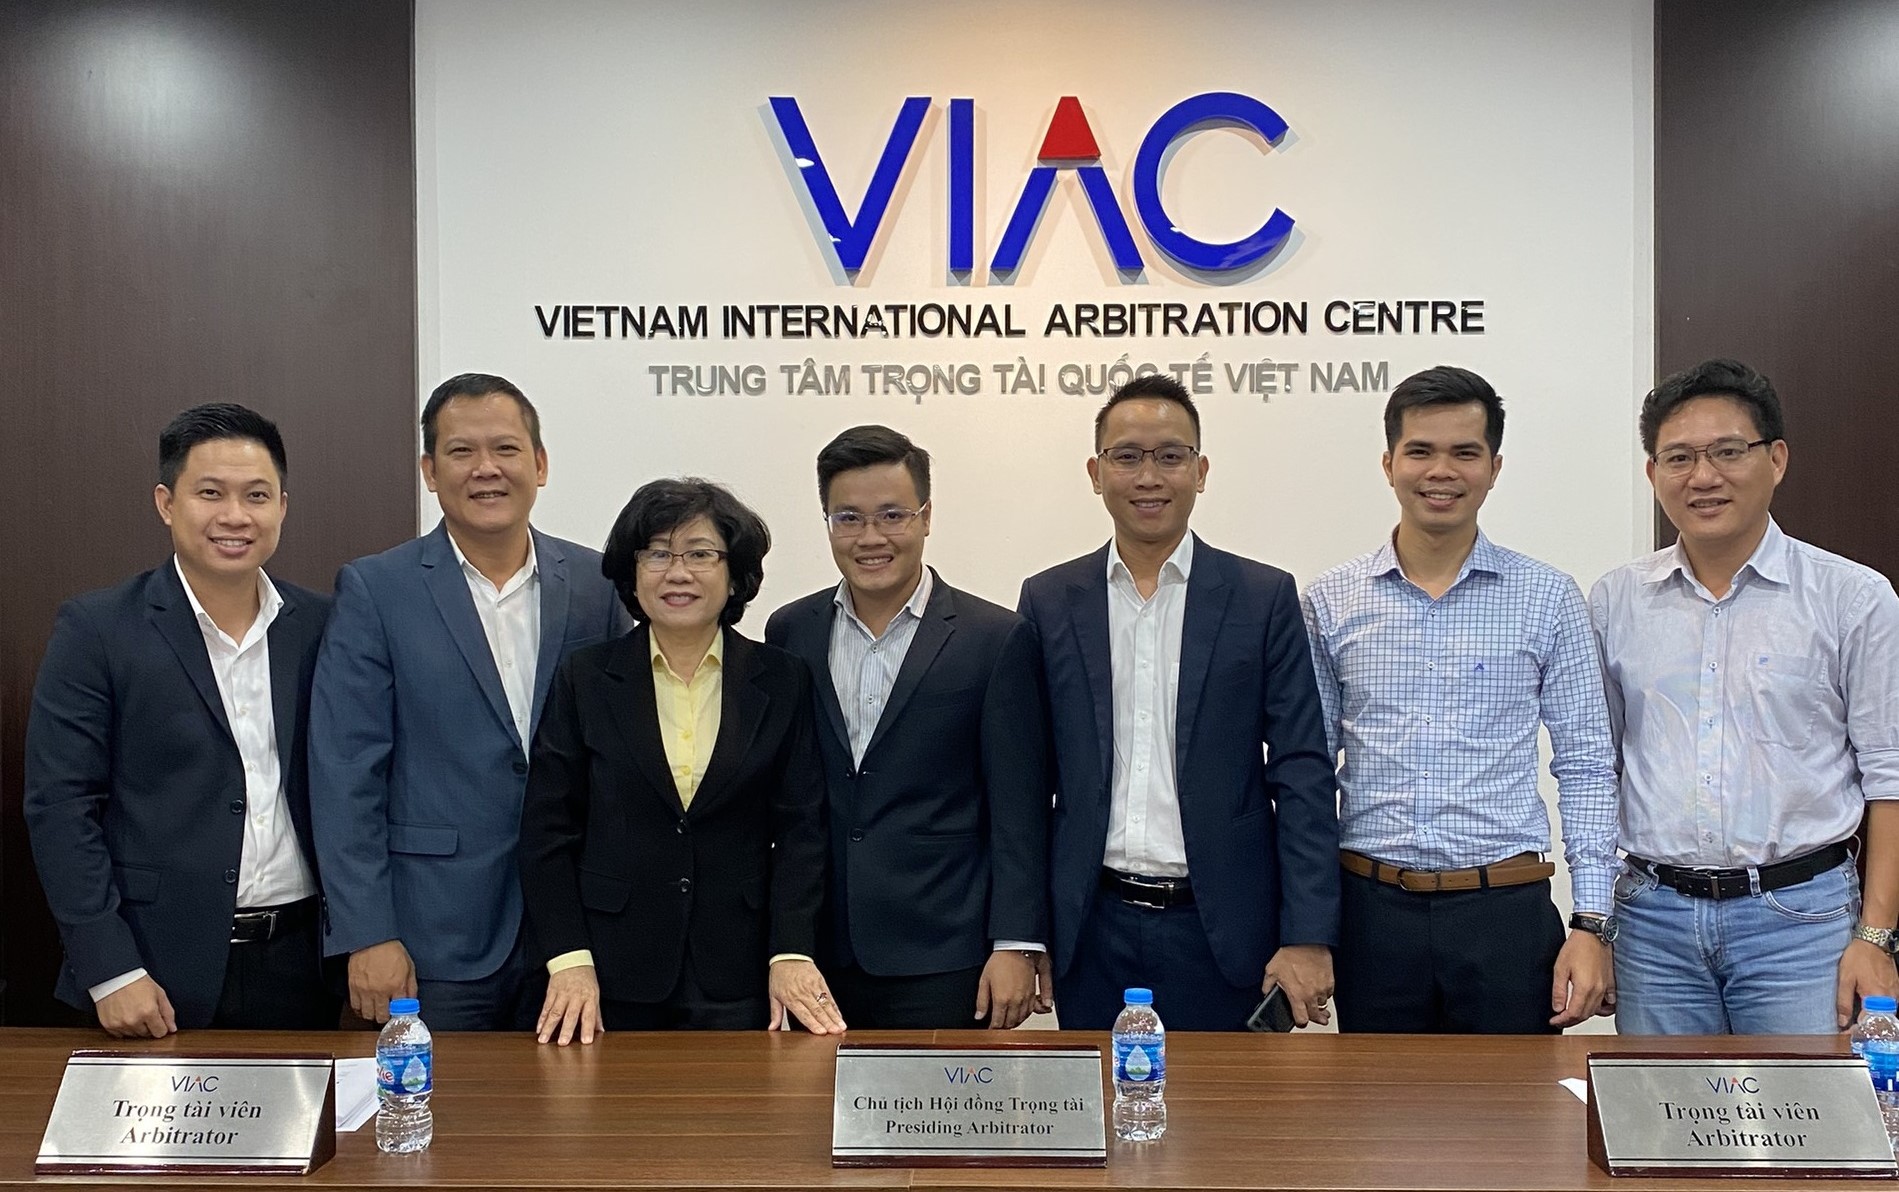 ALB & Partners team participated in a meeting at VIAC to resolve disputes with FLC